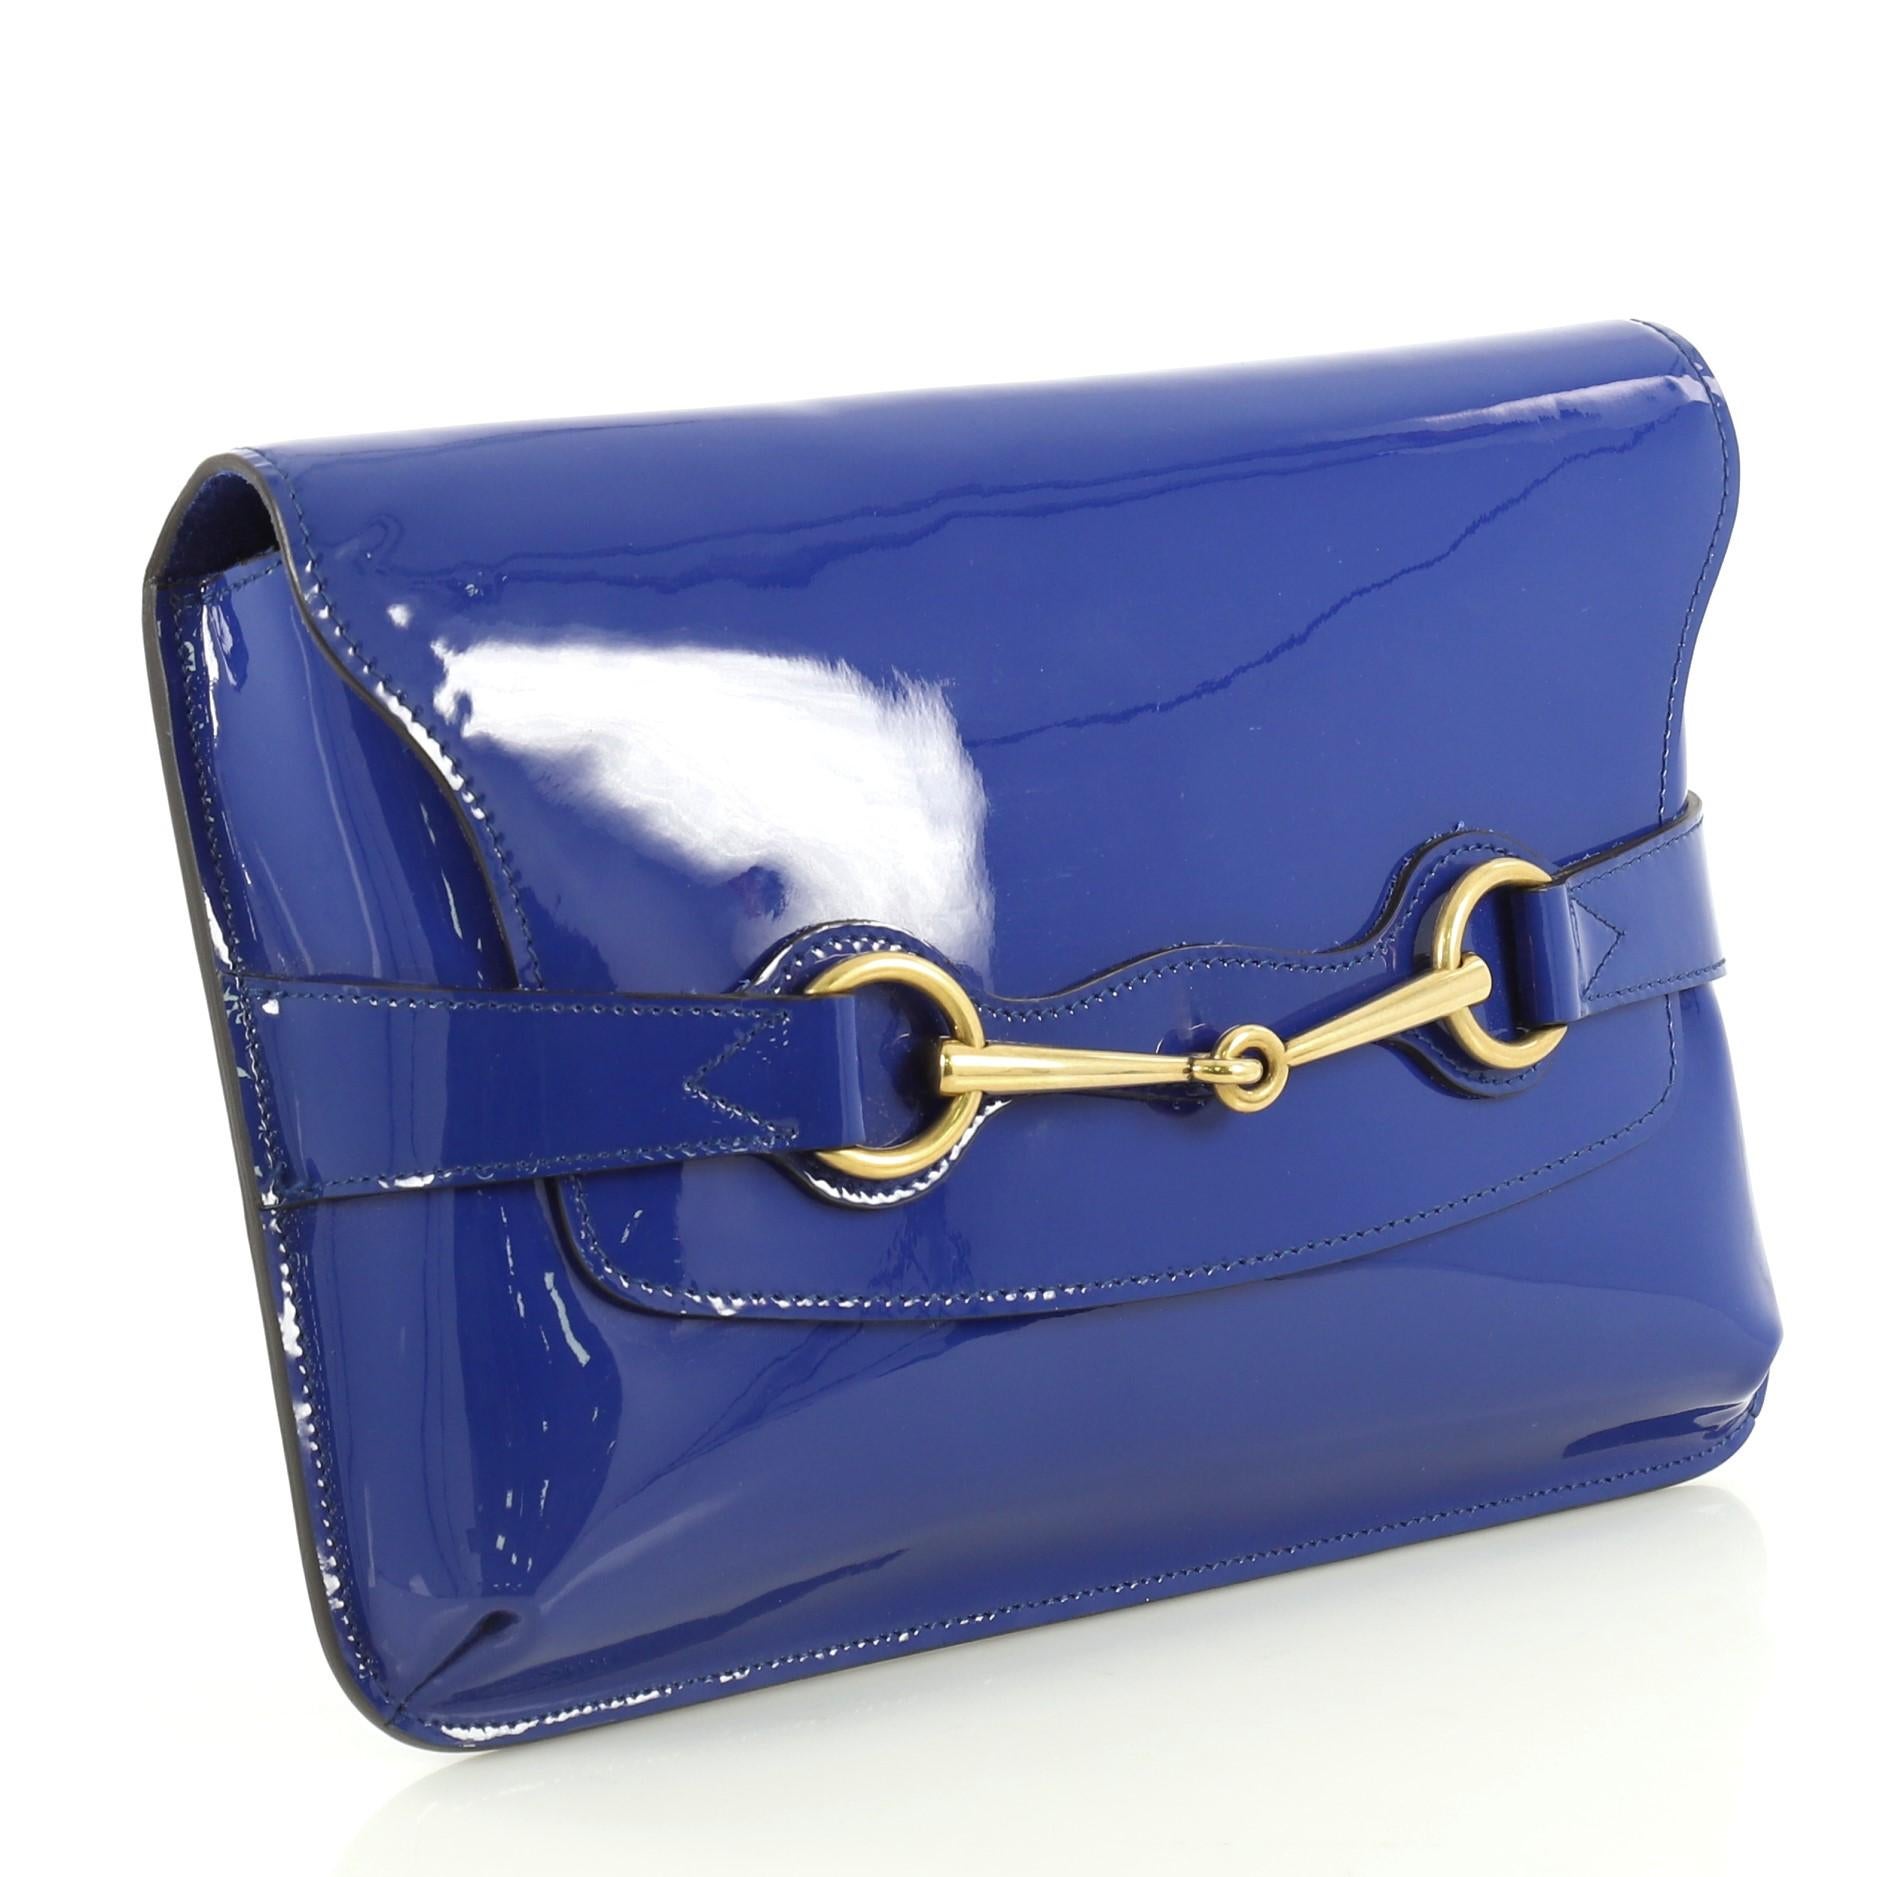 This Gucci Bright Bit Clutch Patent, crafted in blue patent leather, features signature horsebit design and aged gold-tone hardware. Its slide flap closure opens to a neutral fabric interior with side zip and slip pockets. 

Estimated Retail Price: